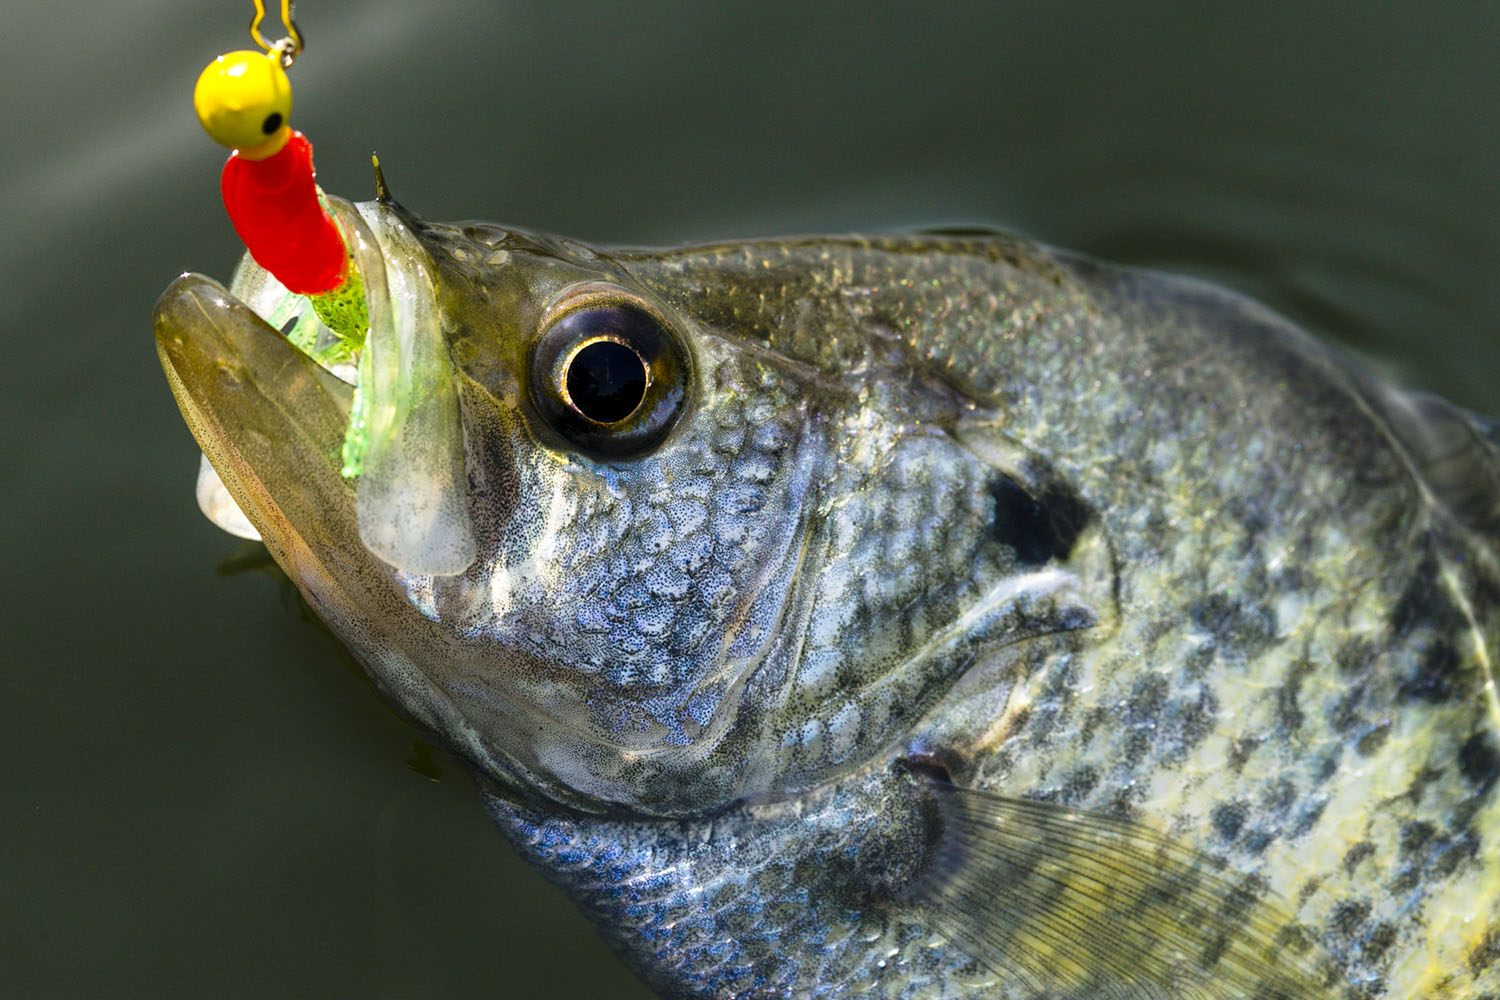 Get hooked on crappies this spring